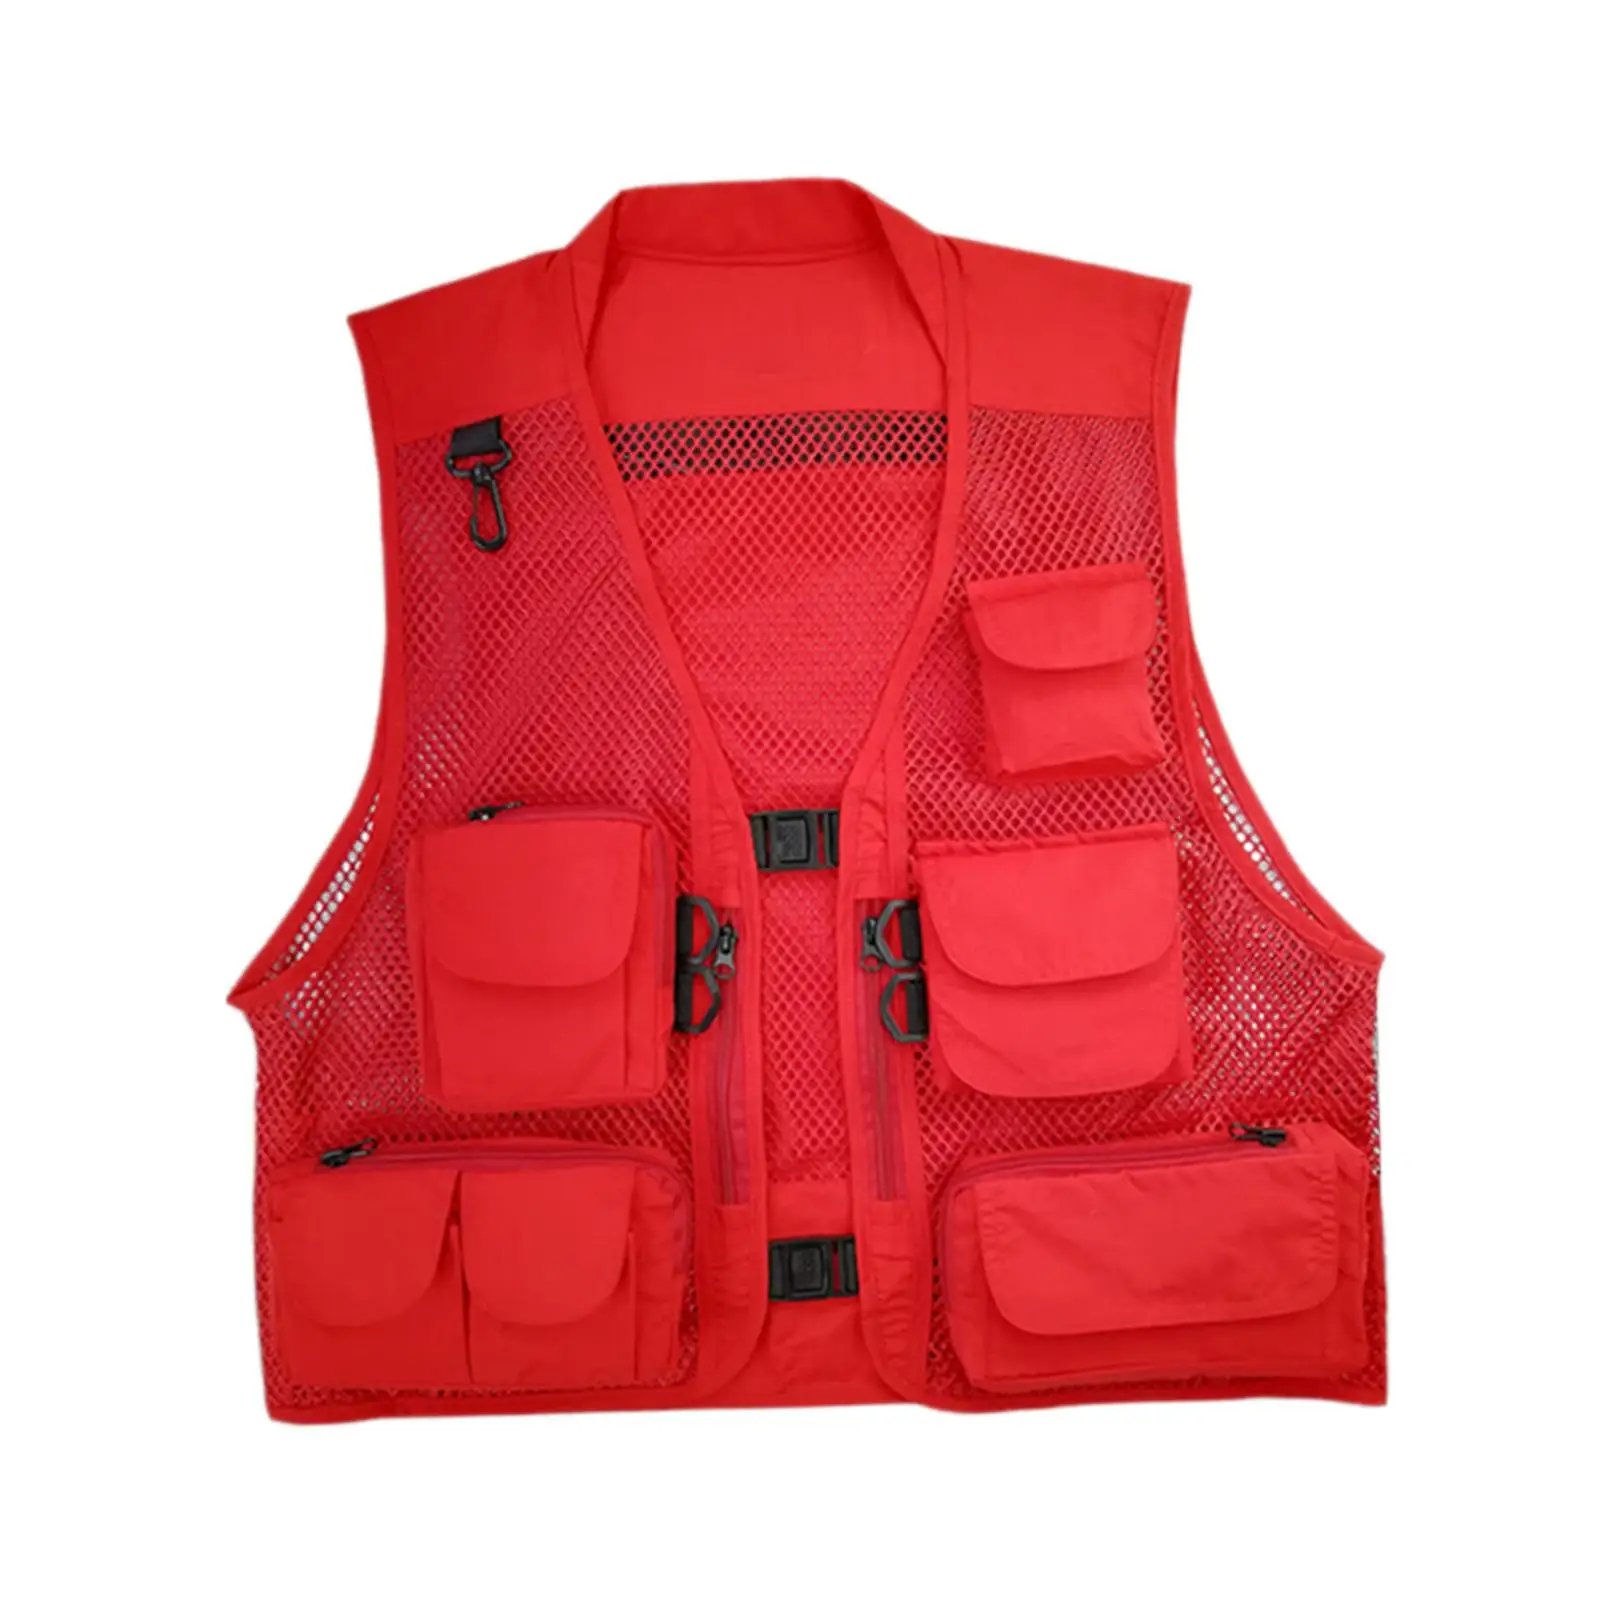 Men Mesh Fishing Photography Vest Multiple Pockets Red Durable for Sightseeing,Traveling Quick Drying Breathable Material Casual